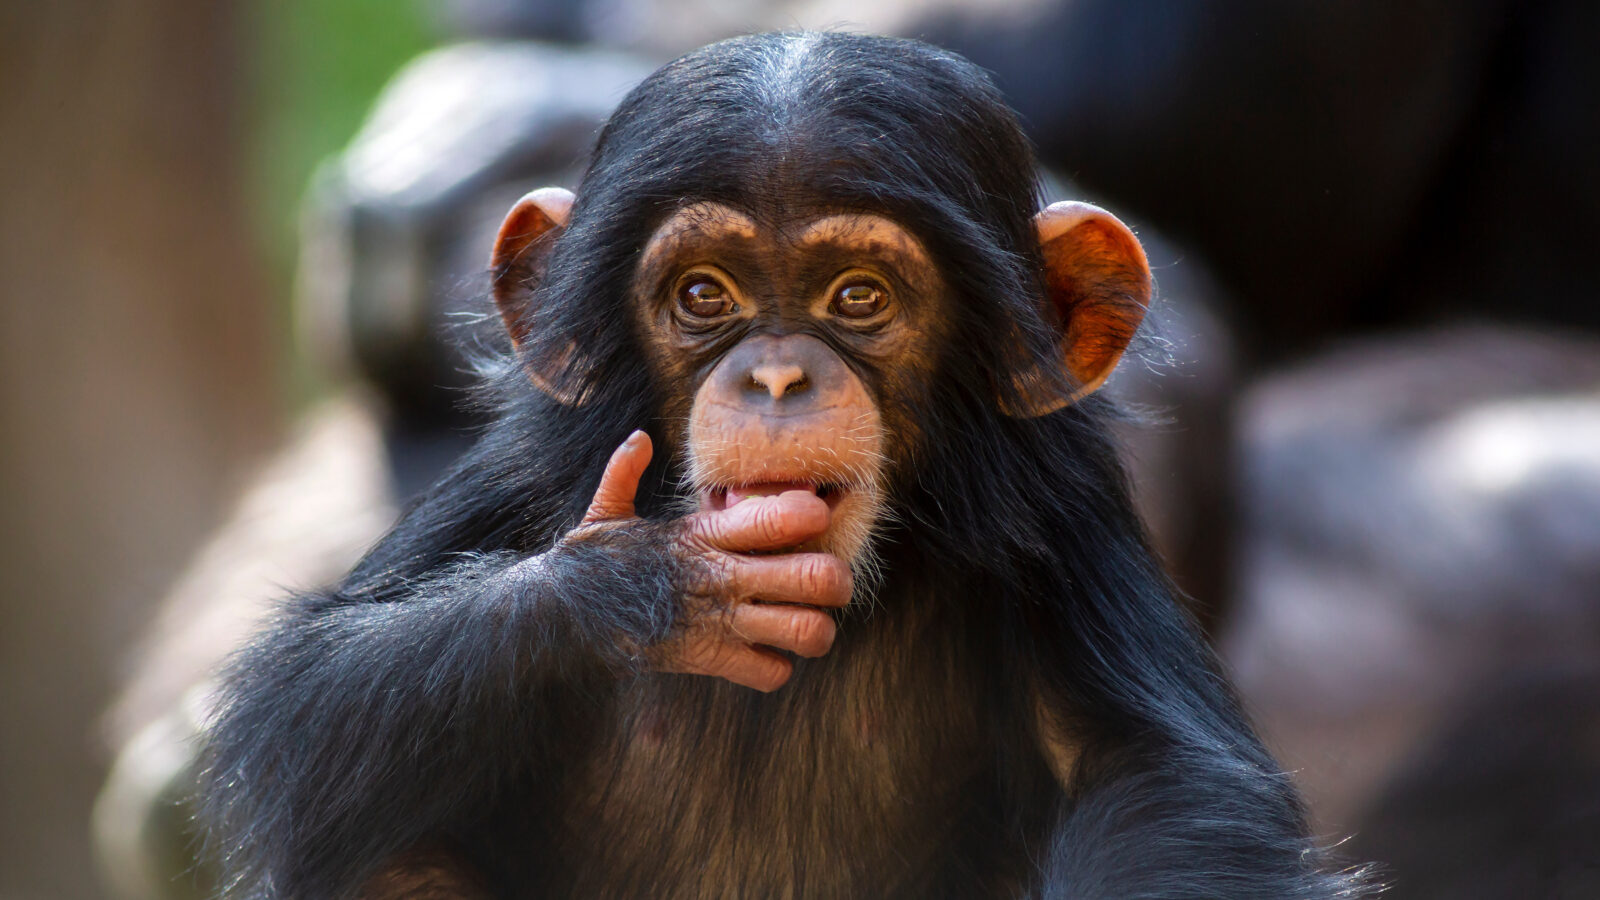 Close up portrait of a cute baby chimpanzee making eye contact